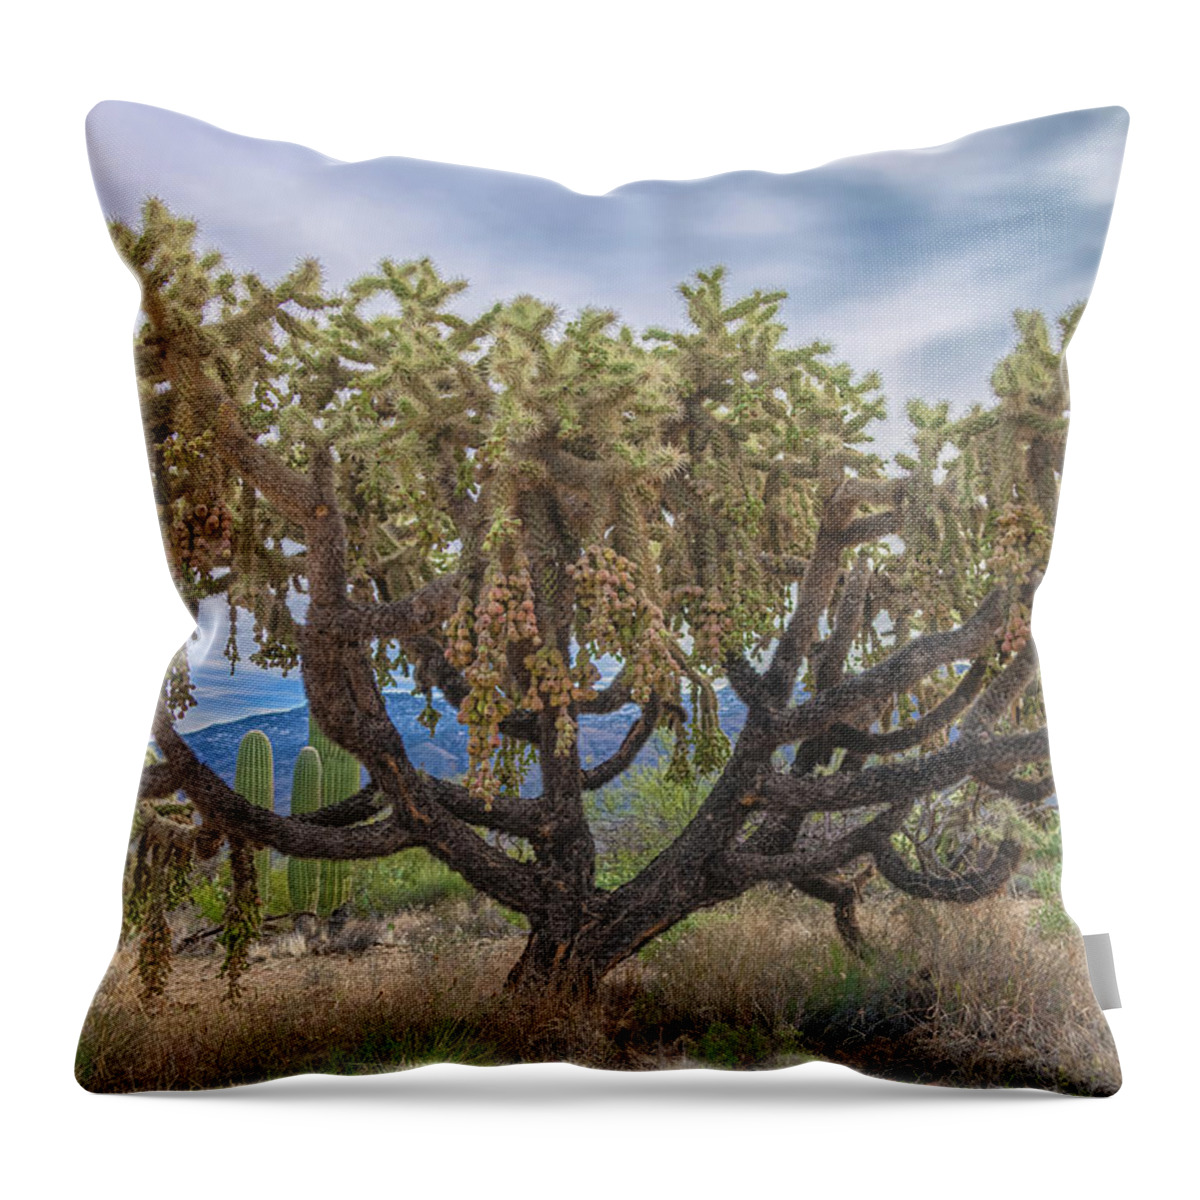 Chain-fruit Cholla Throw Pillow featuring the photograph Chained-fruit Cholla by Jonathan Nguyen